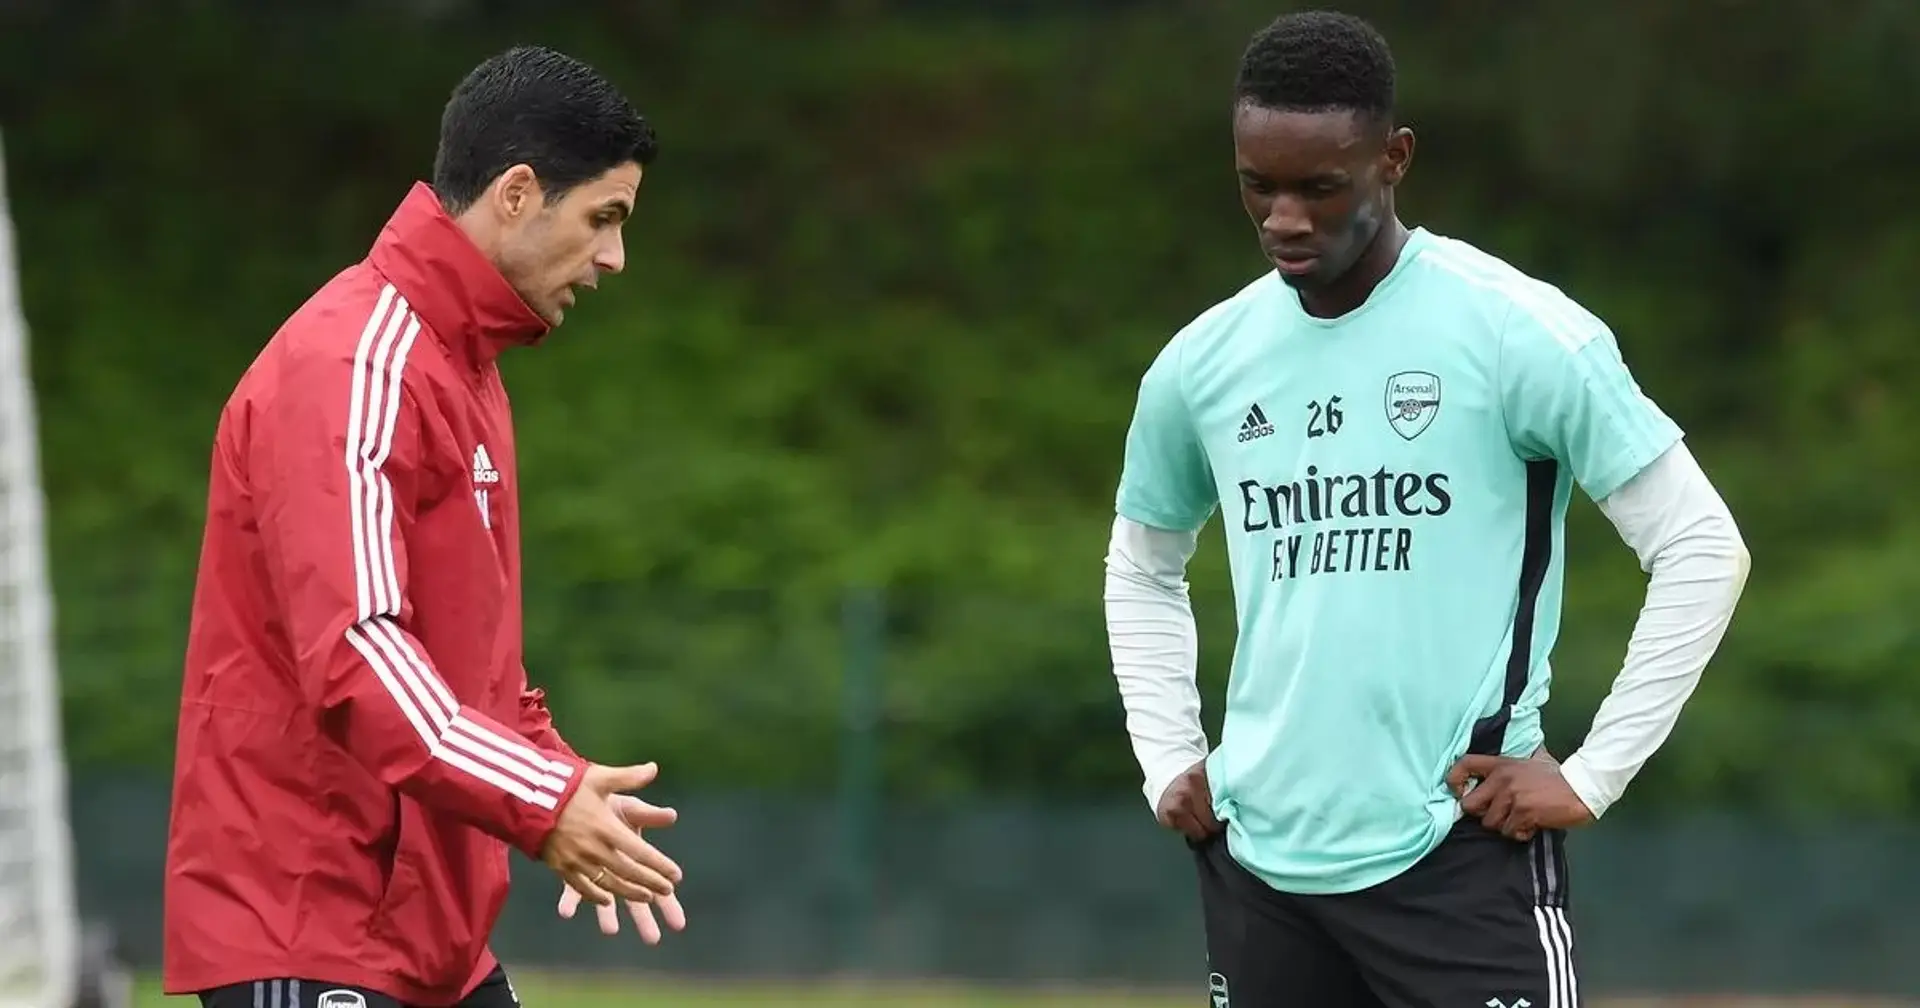 'They were very clear on his development plan': Former Arsenal coach reveals how Balogun grew quickly as a player